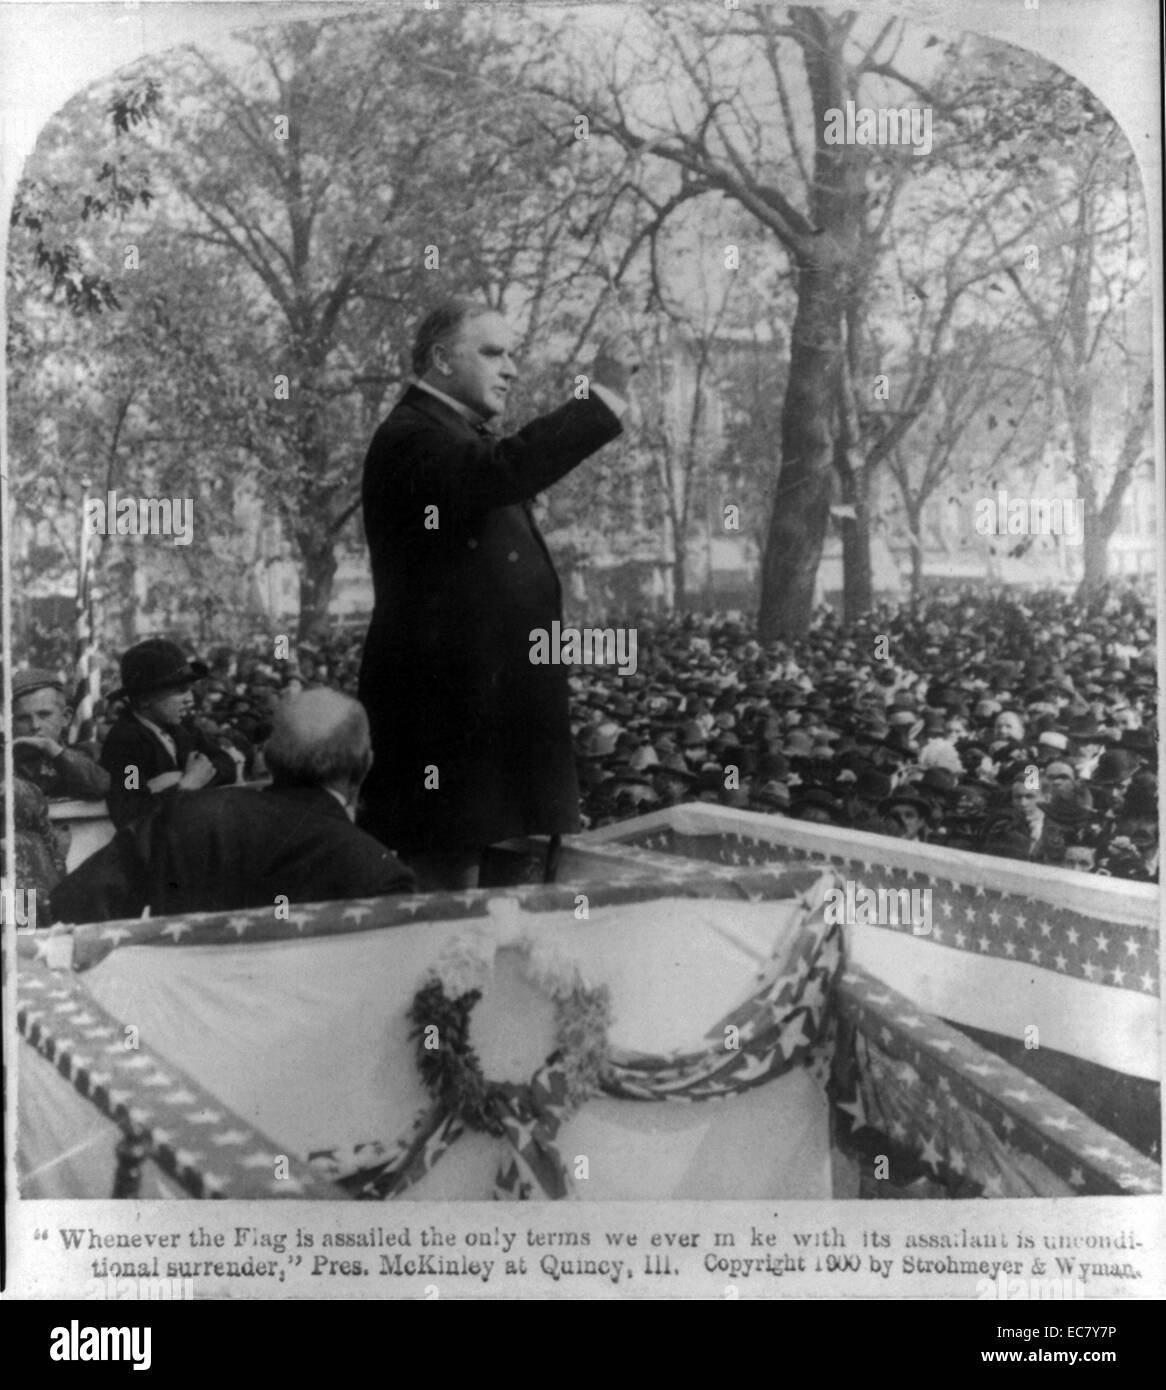 President William McKinley speaking at Quincy Ill. McKinley (1843-1901)was the 25th President of the United States and led the nation to victory in the Spanish–American War, raised protective tariffs to promote American industry, and maintained the nation on the gold standard in a rejection of inflationary proposals. Stock Photo